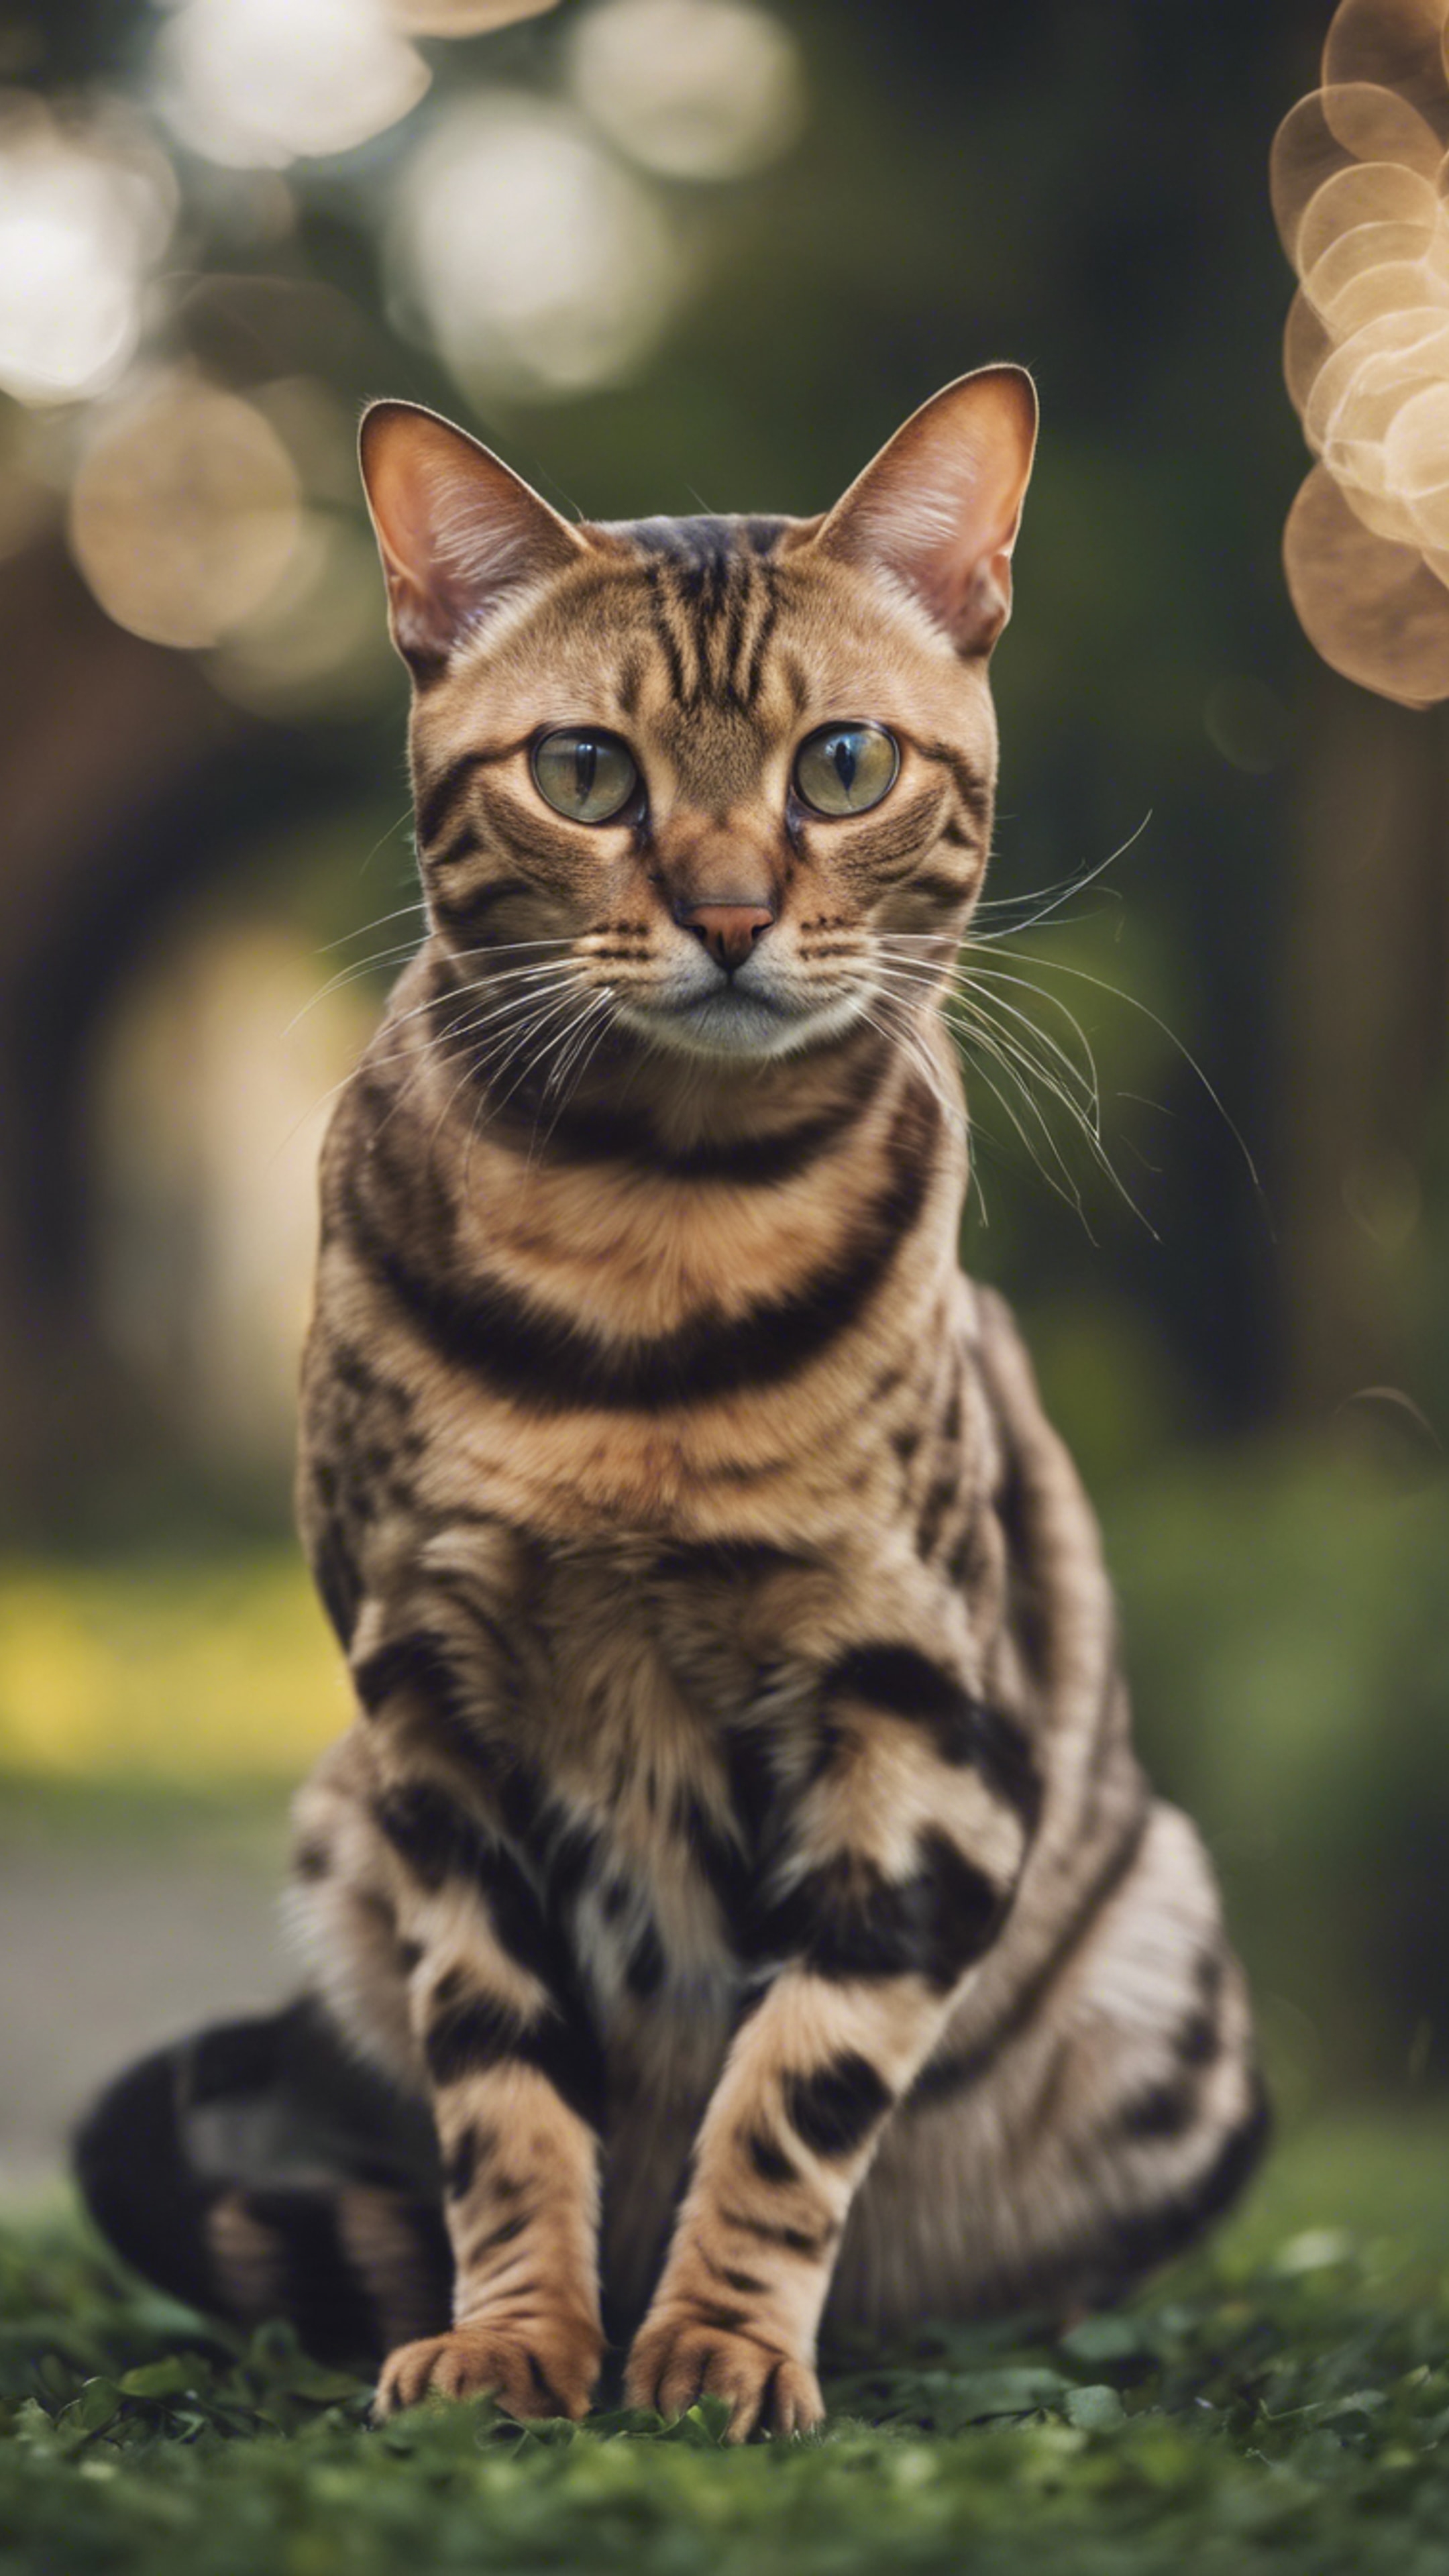 A sleek, aristocratic Bengal cat royally ignoring a mouse scampering by. Tapetai[9f7ab84a7c6b485a8696]